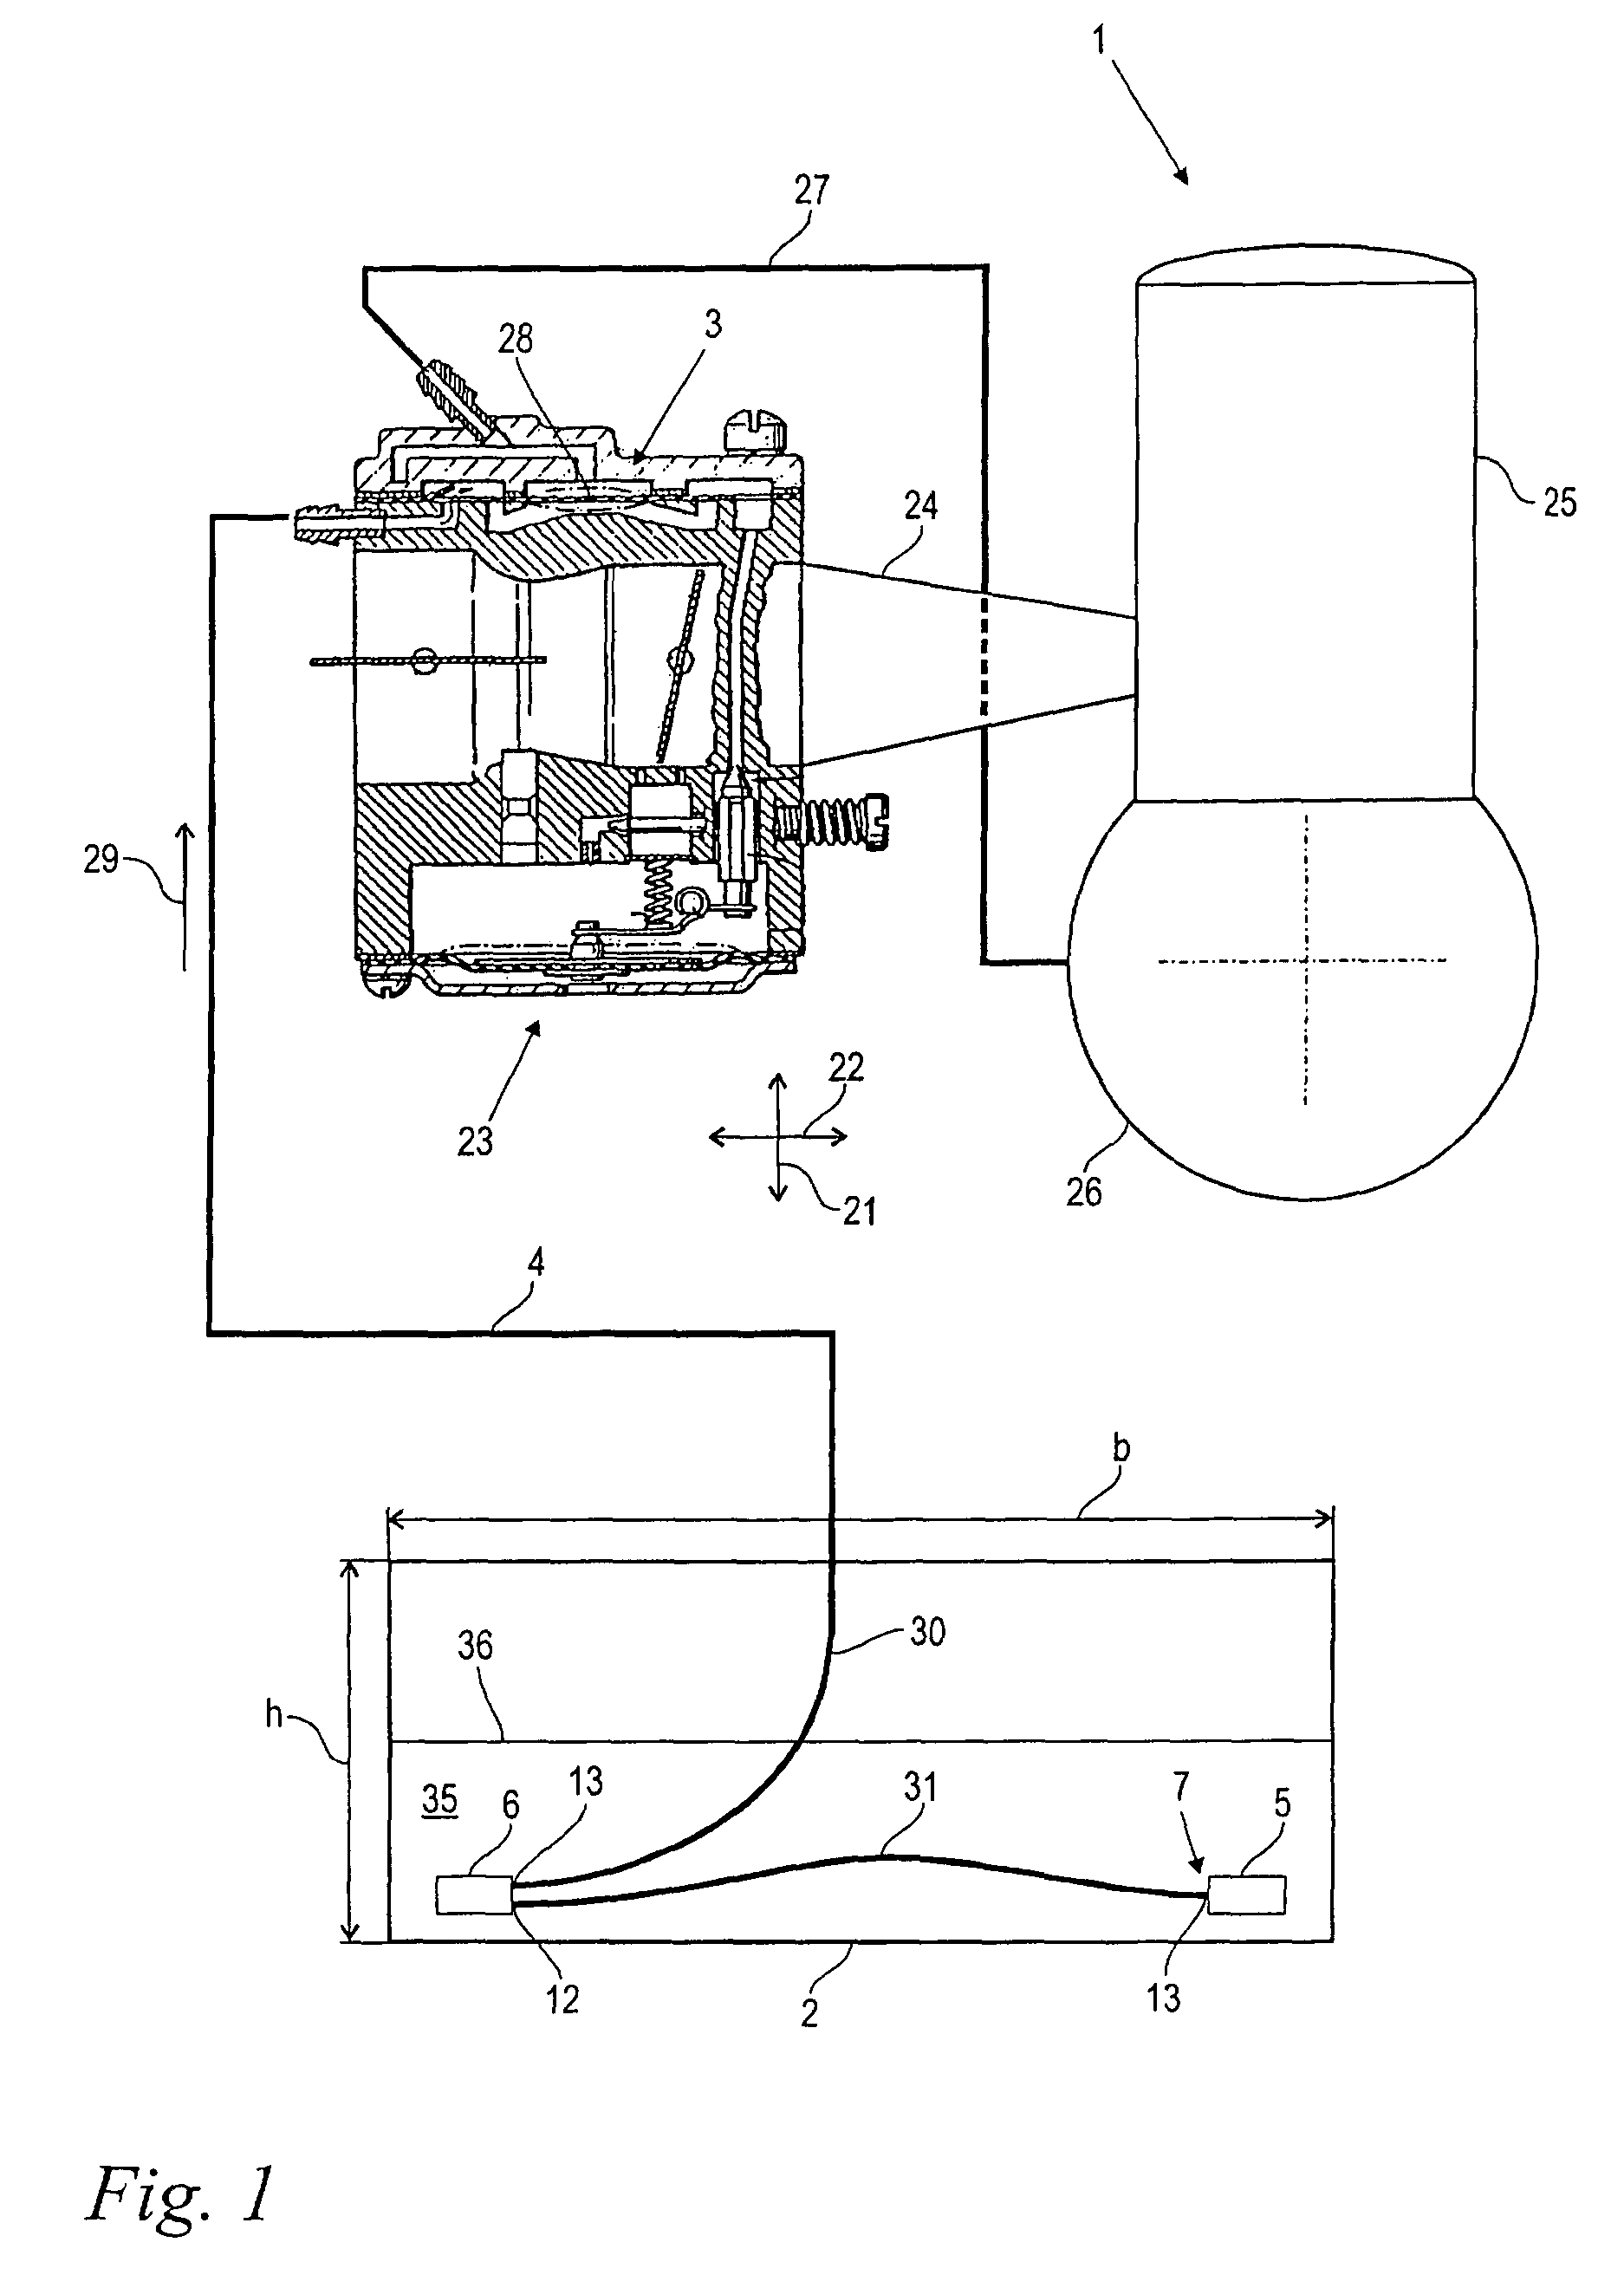 Fuel system of a handheld work apparatus